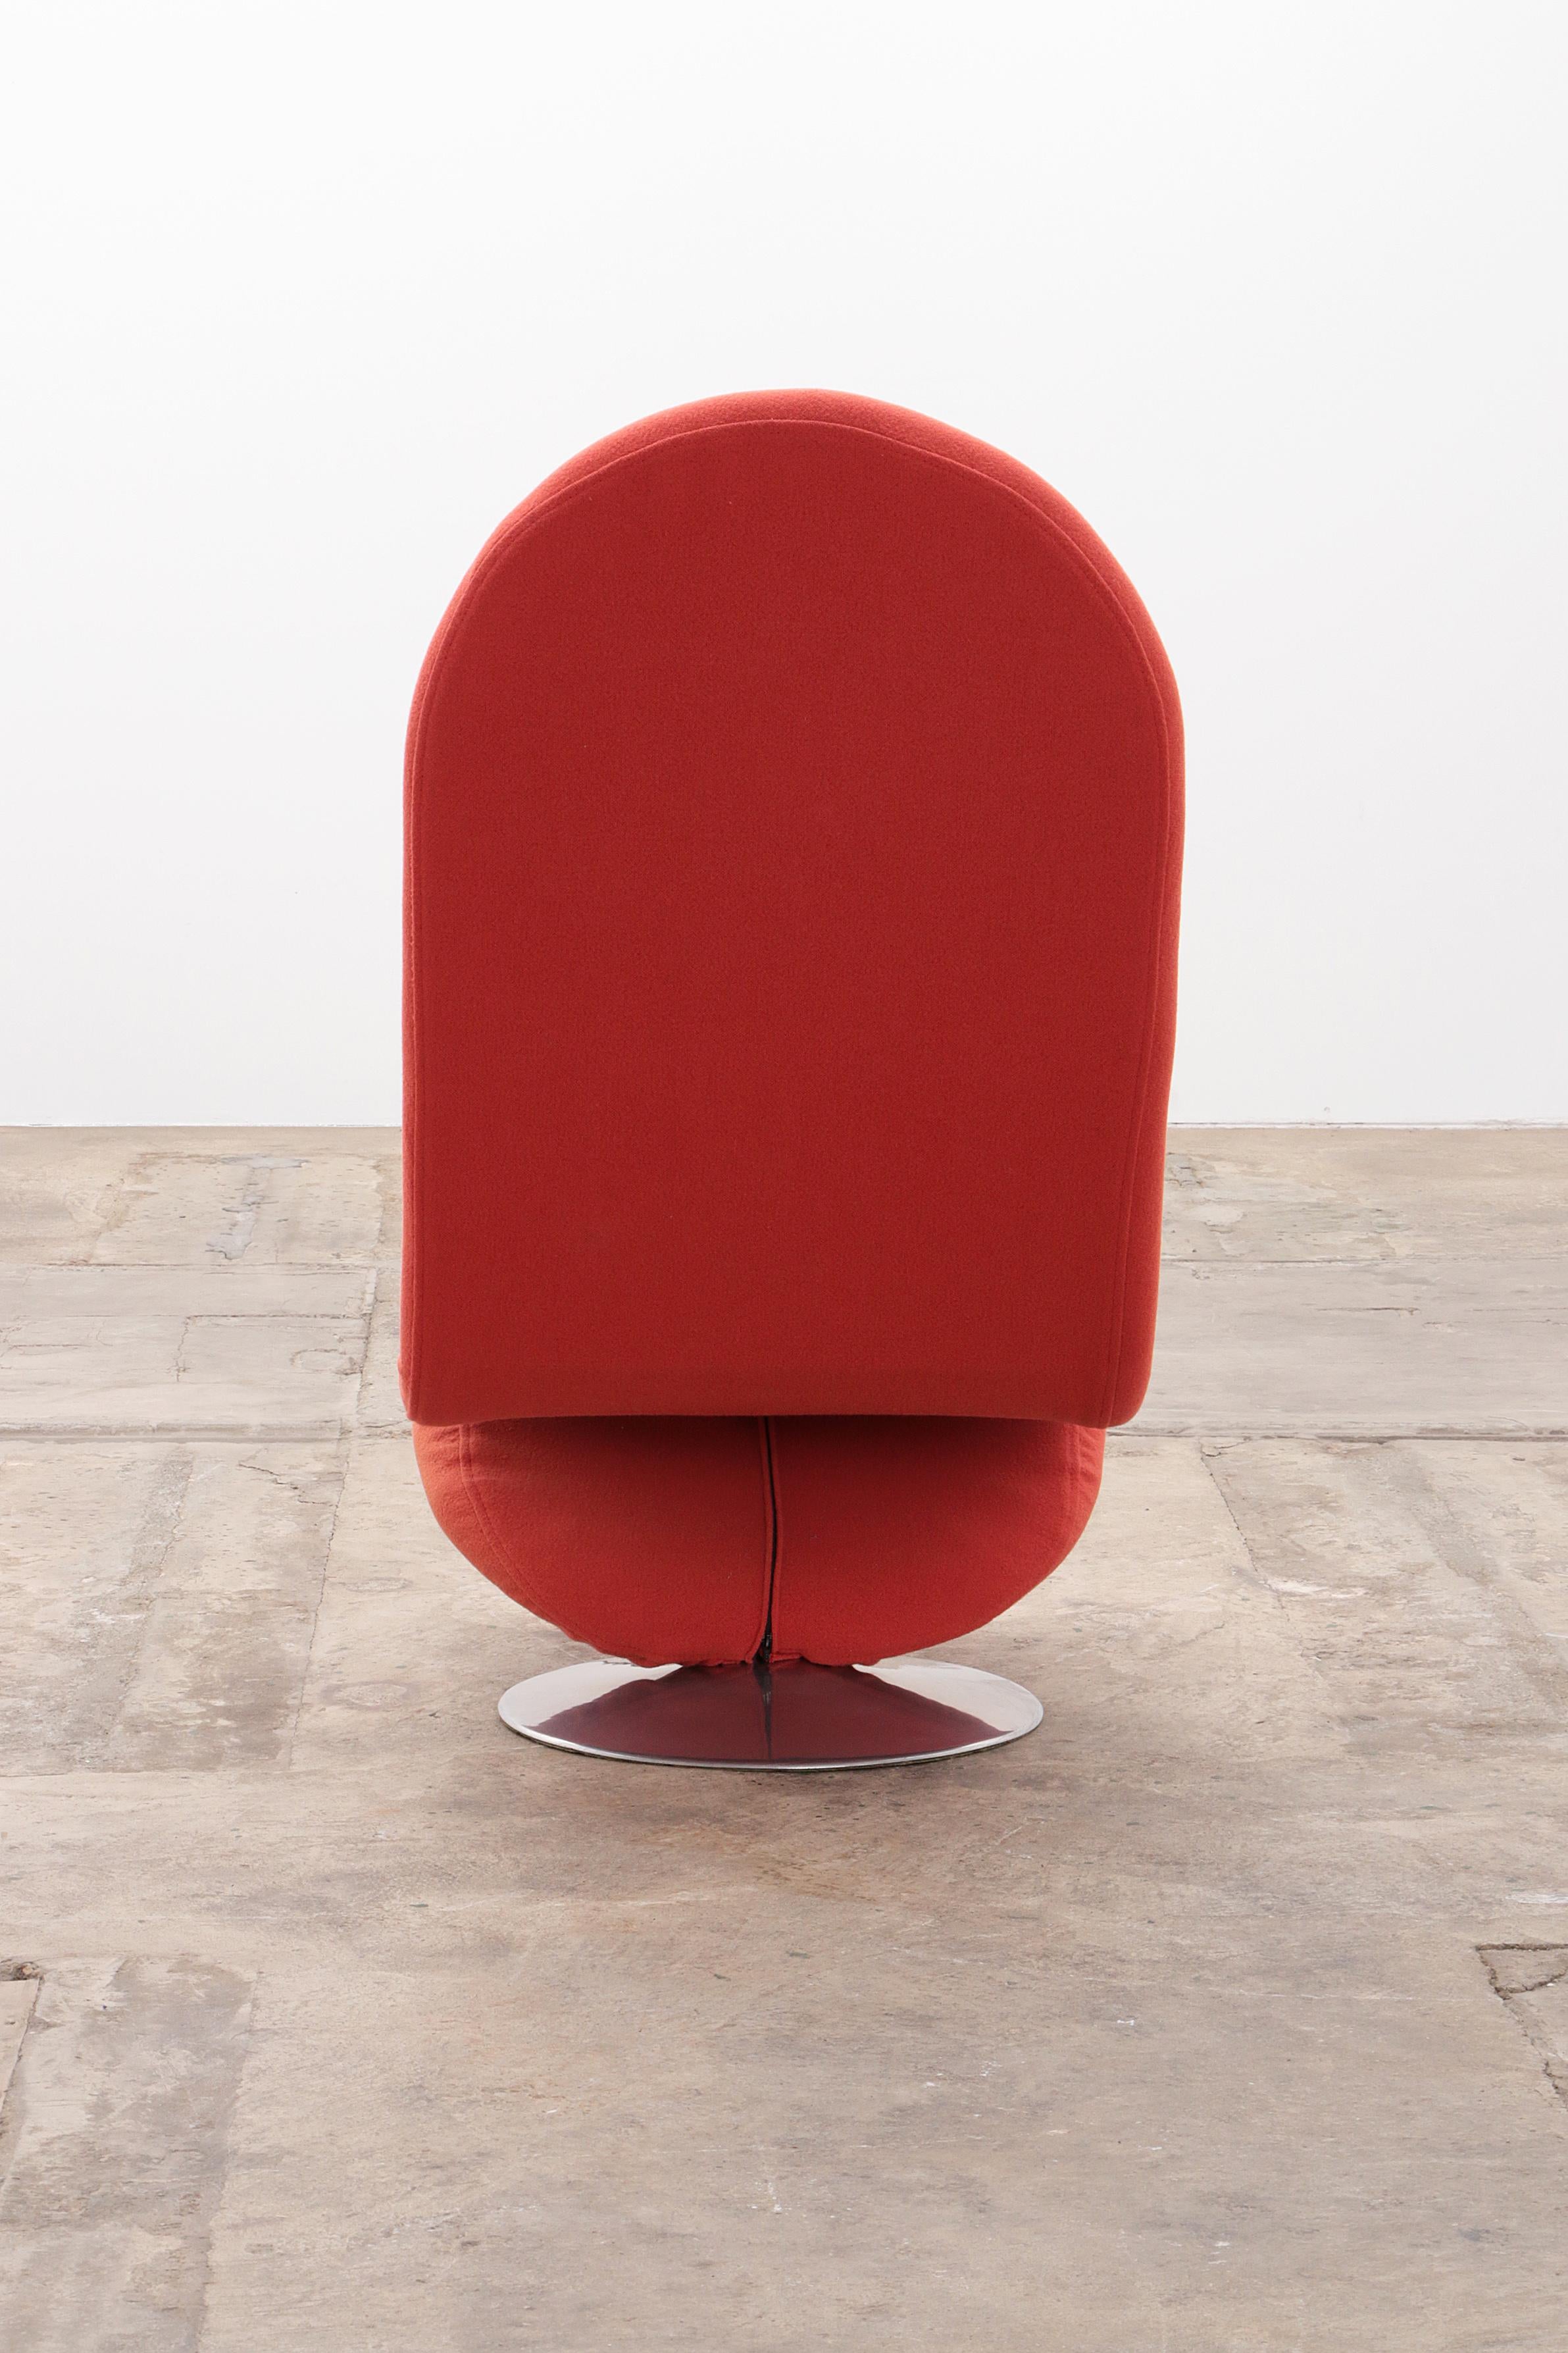 Verner Panton 1-2-3 Chair with High Backrest - Red/Orange, 1973 In Good Condition For Sale In Oostrum-Venray, NL